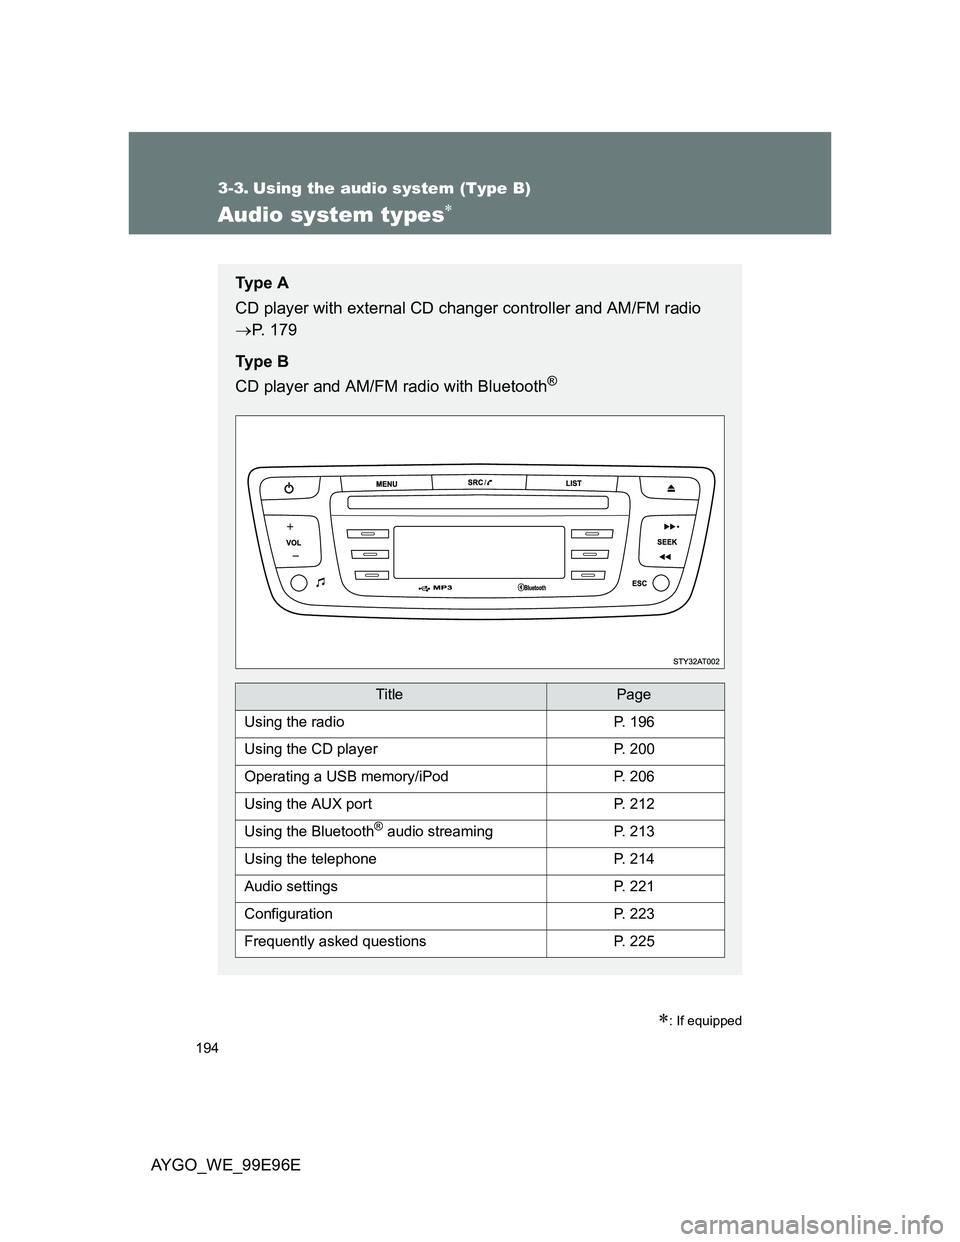 TOYOTA AYGO 2012  Owners Manual (in English) 194
AYGO_WE_99E96E
3-3. Using the audio system (Type B)
Audio system types
: If equipped
Ty p e  A
CD player with external CD changer controller and AM/FM radio
P. 179
Ty p e  B
CD player and